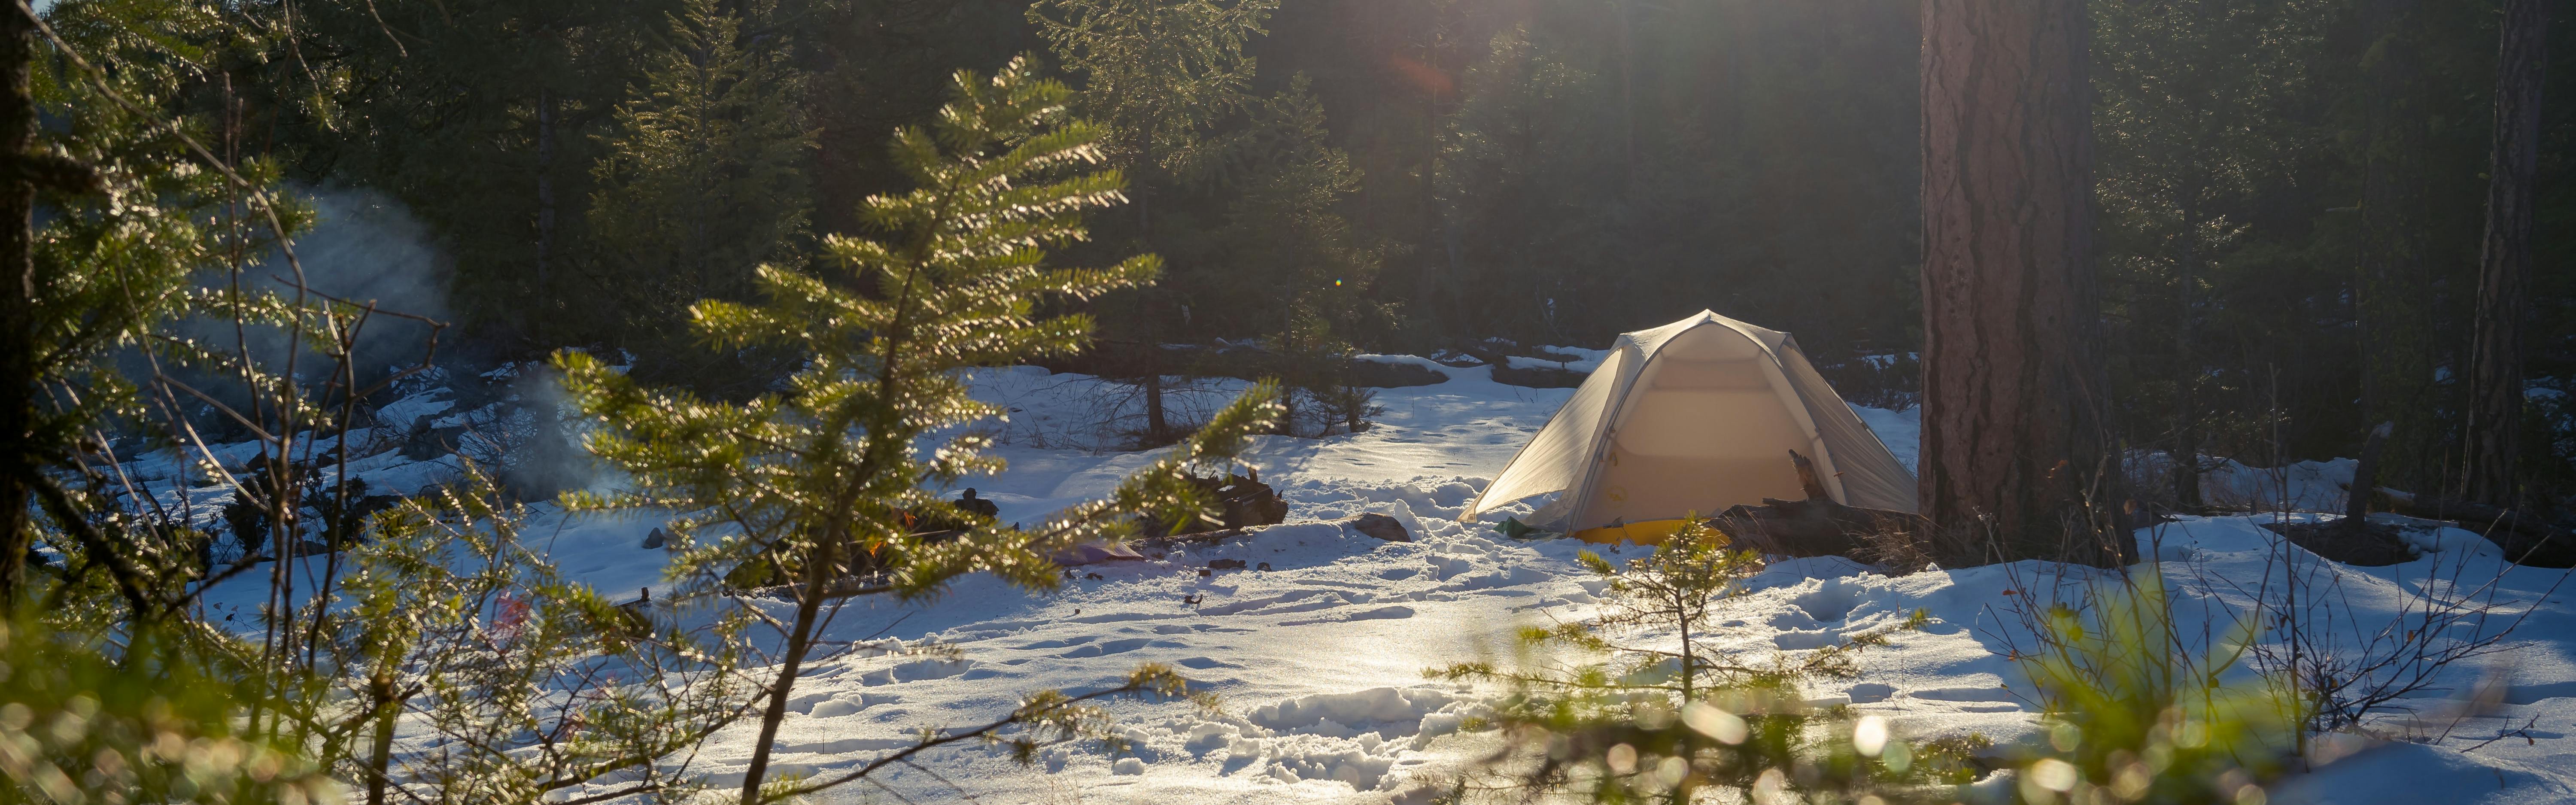 Camping in the forest in the winter